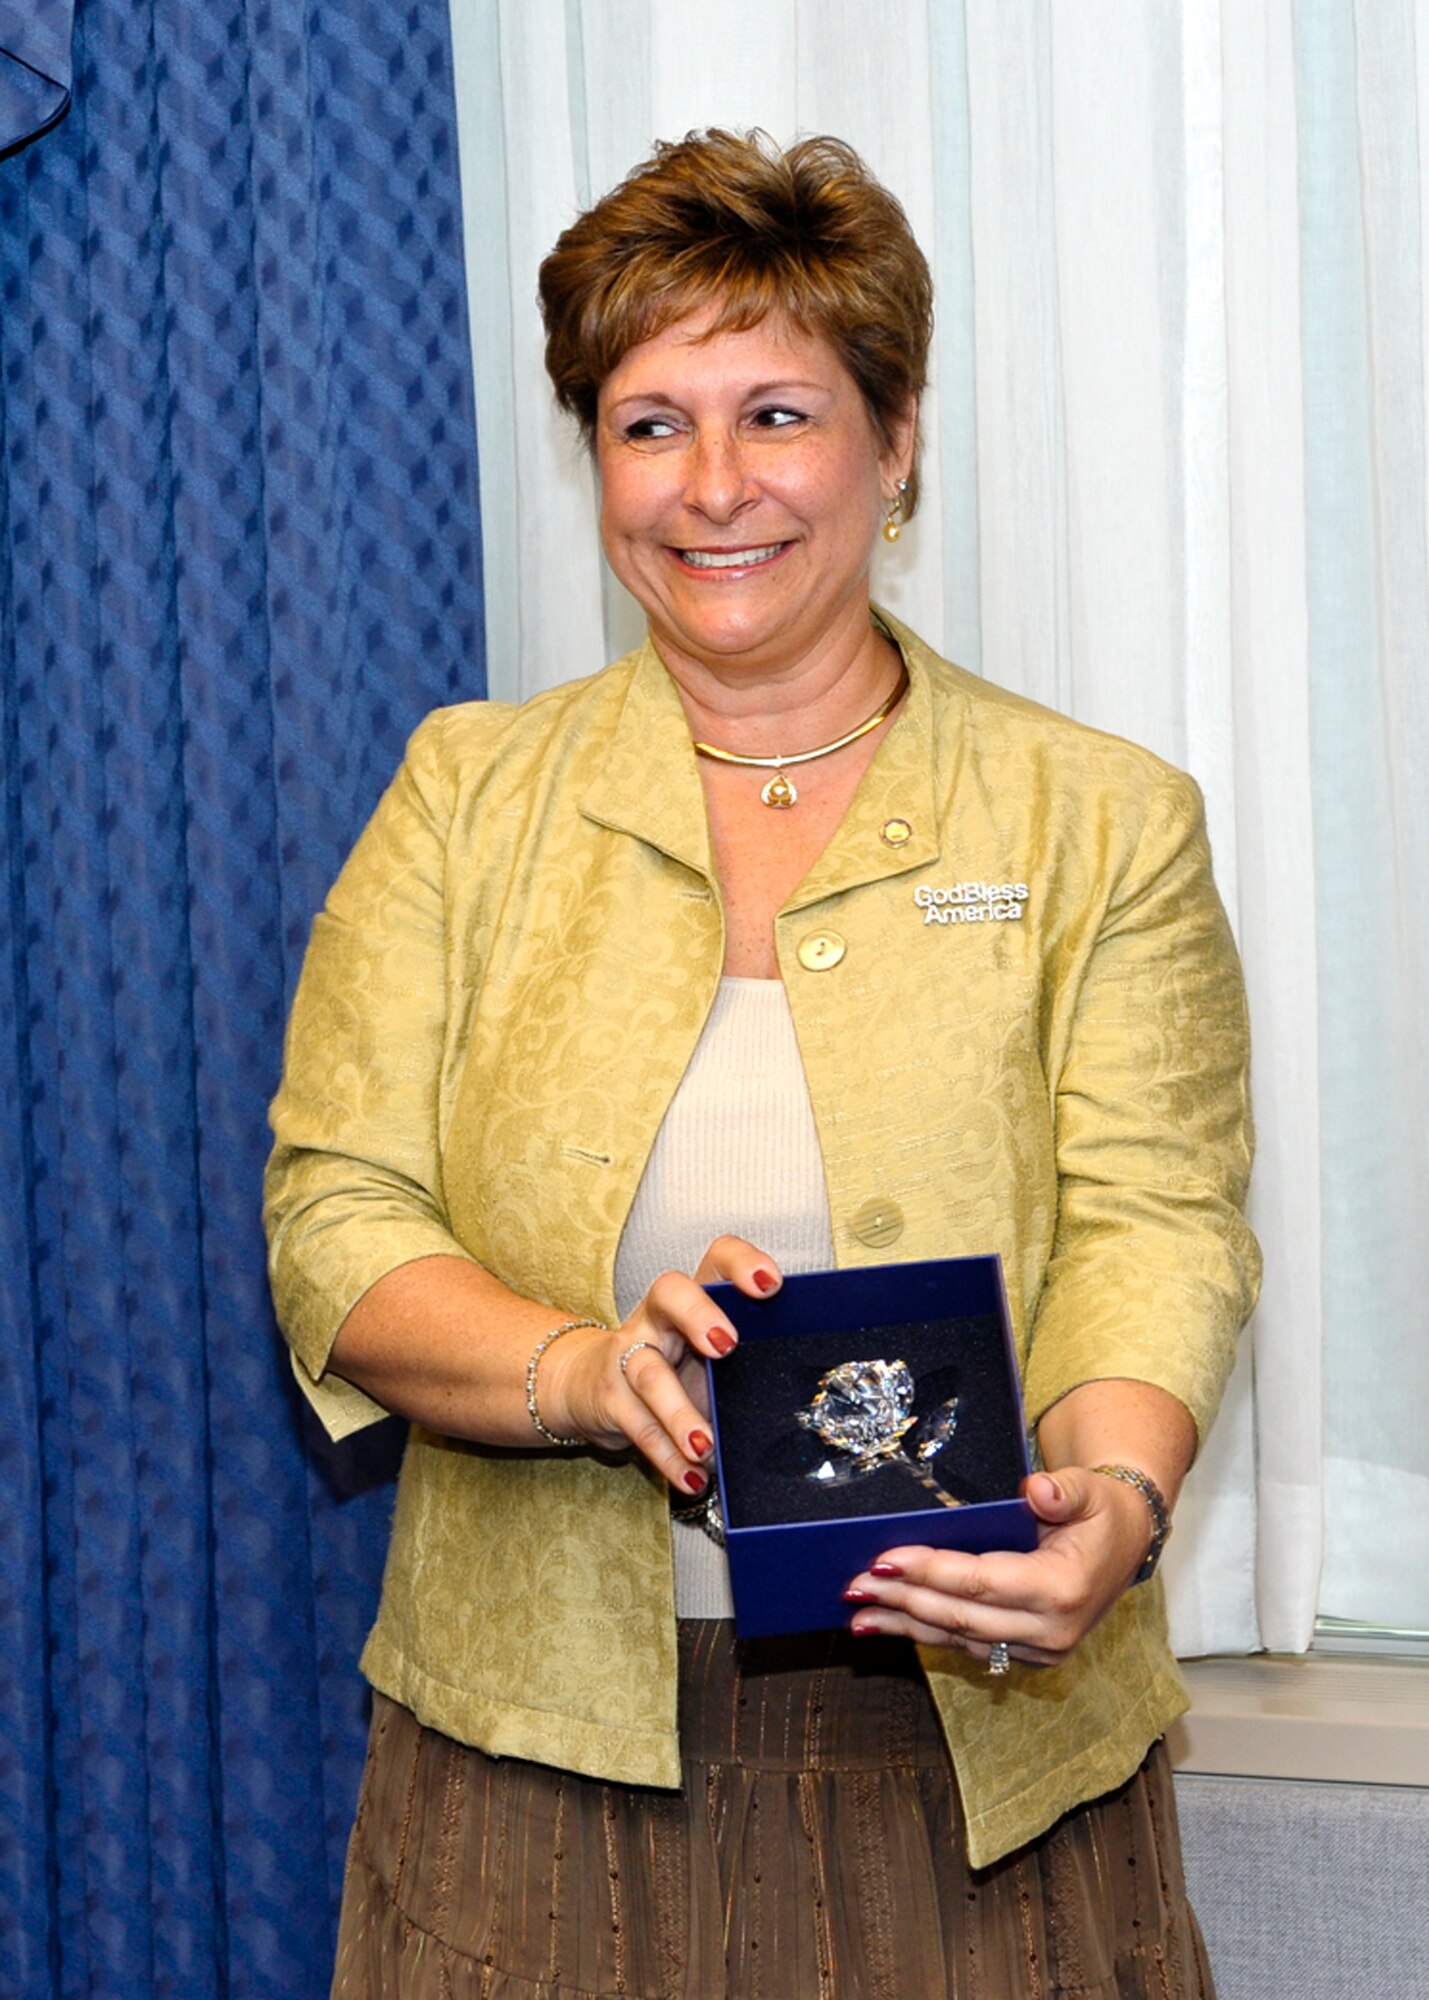 Marianne Williams, wife of Brig. Gen. Brett Williams, shows the crystal rose she received after the couple was honored with the 2009 General and Mrs. Jerome O'Malley Award during a ceremony in the Pentagon Sept. 11, 2009.  The rose was presented to Mrs. Williams by Sharon O'Malley Burg to carry on the O'Malley legacy.  (U.S. Air Force photo/Michael Pausic)